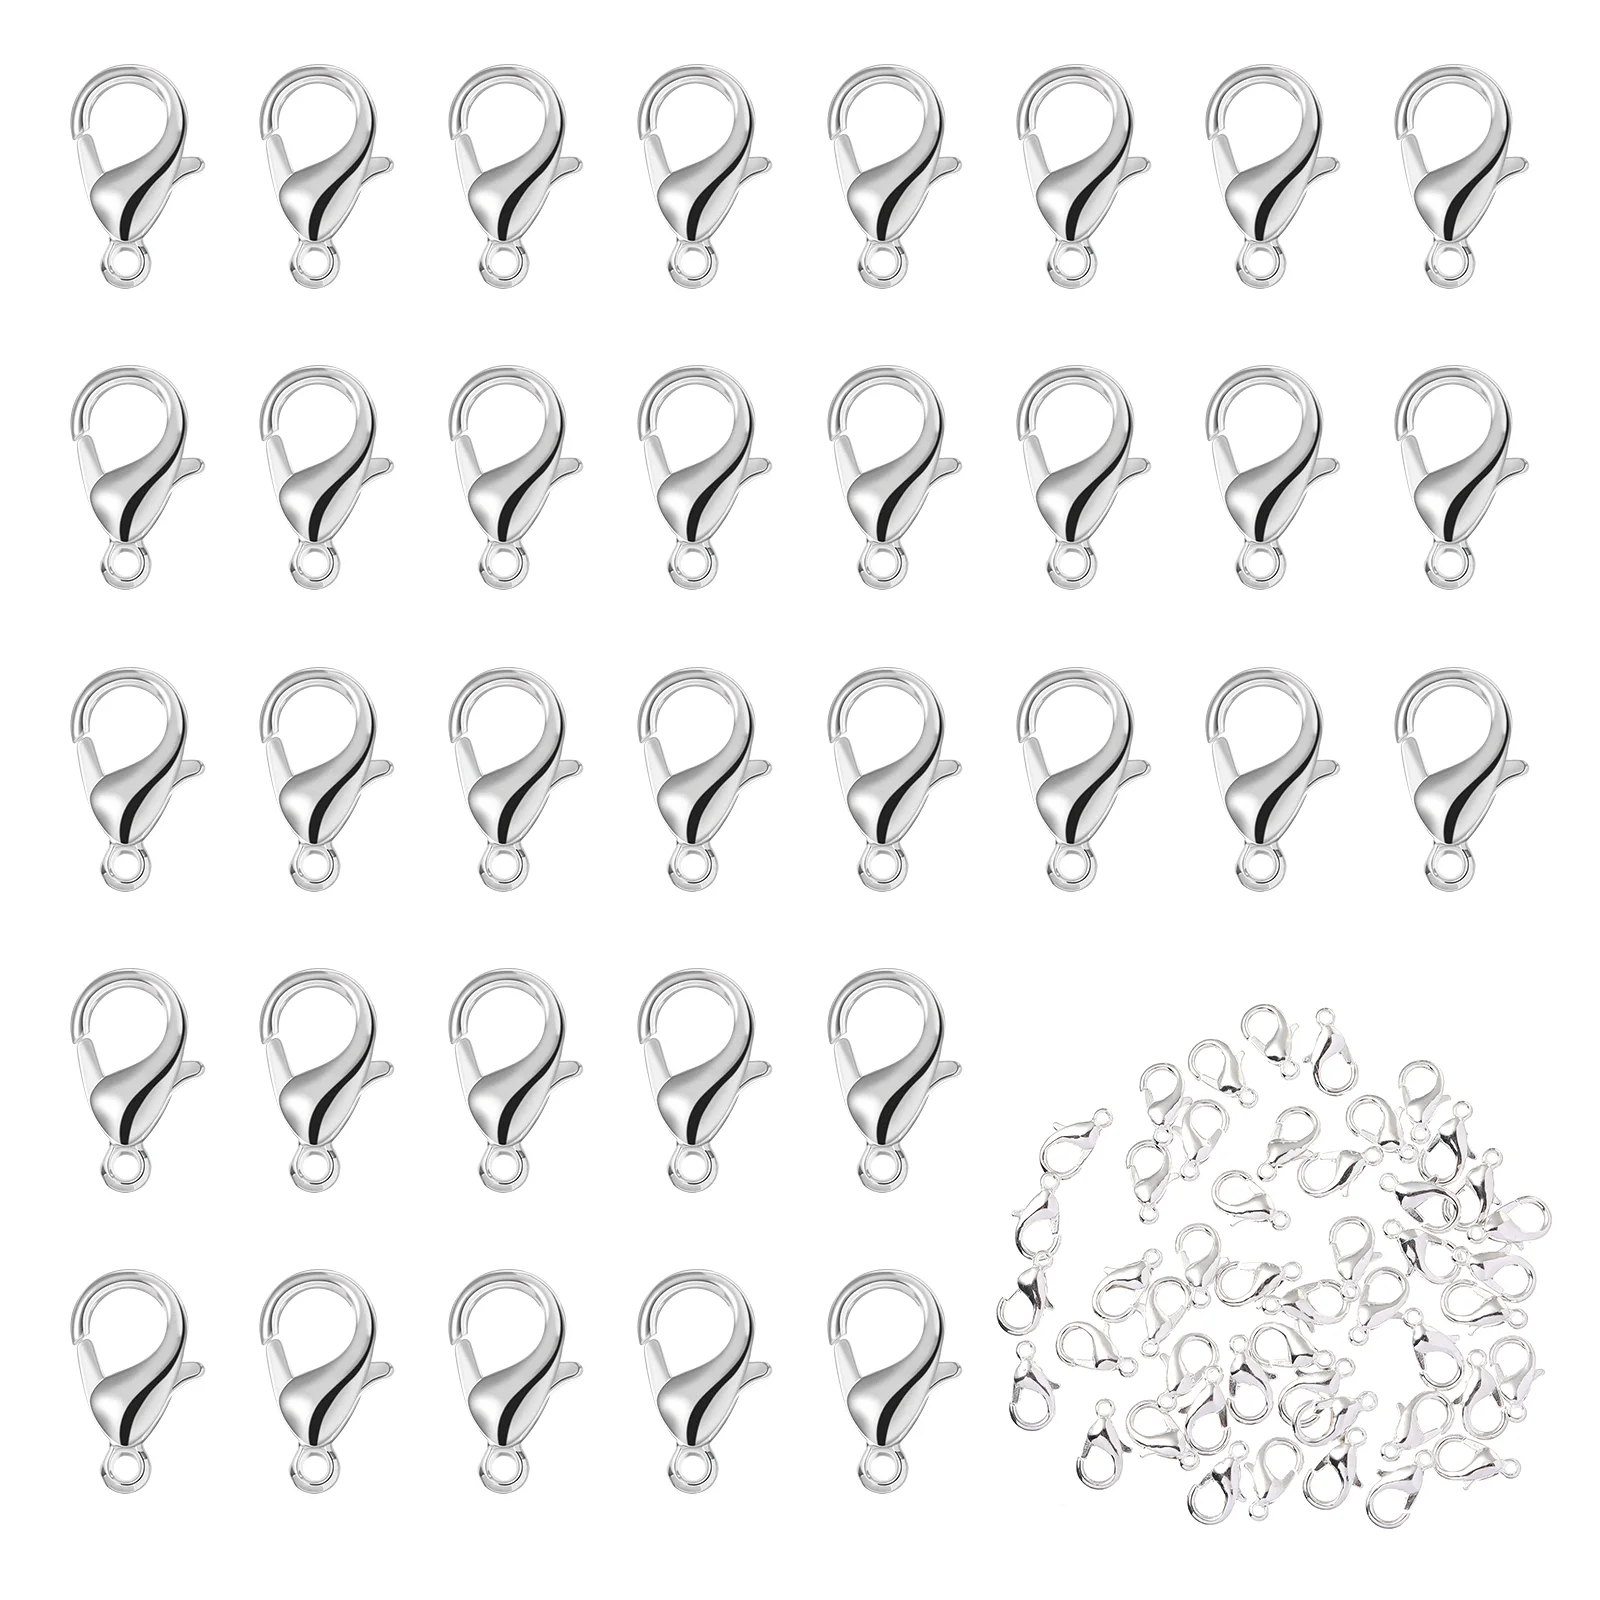 

ULTNICE 100pcs Zinc Alloy Lobster Claw Clasps Snap Hook Fasteners for DIY Jewelry Making (Silver)